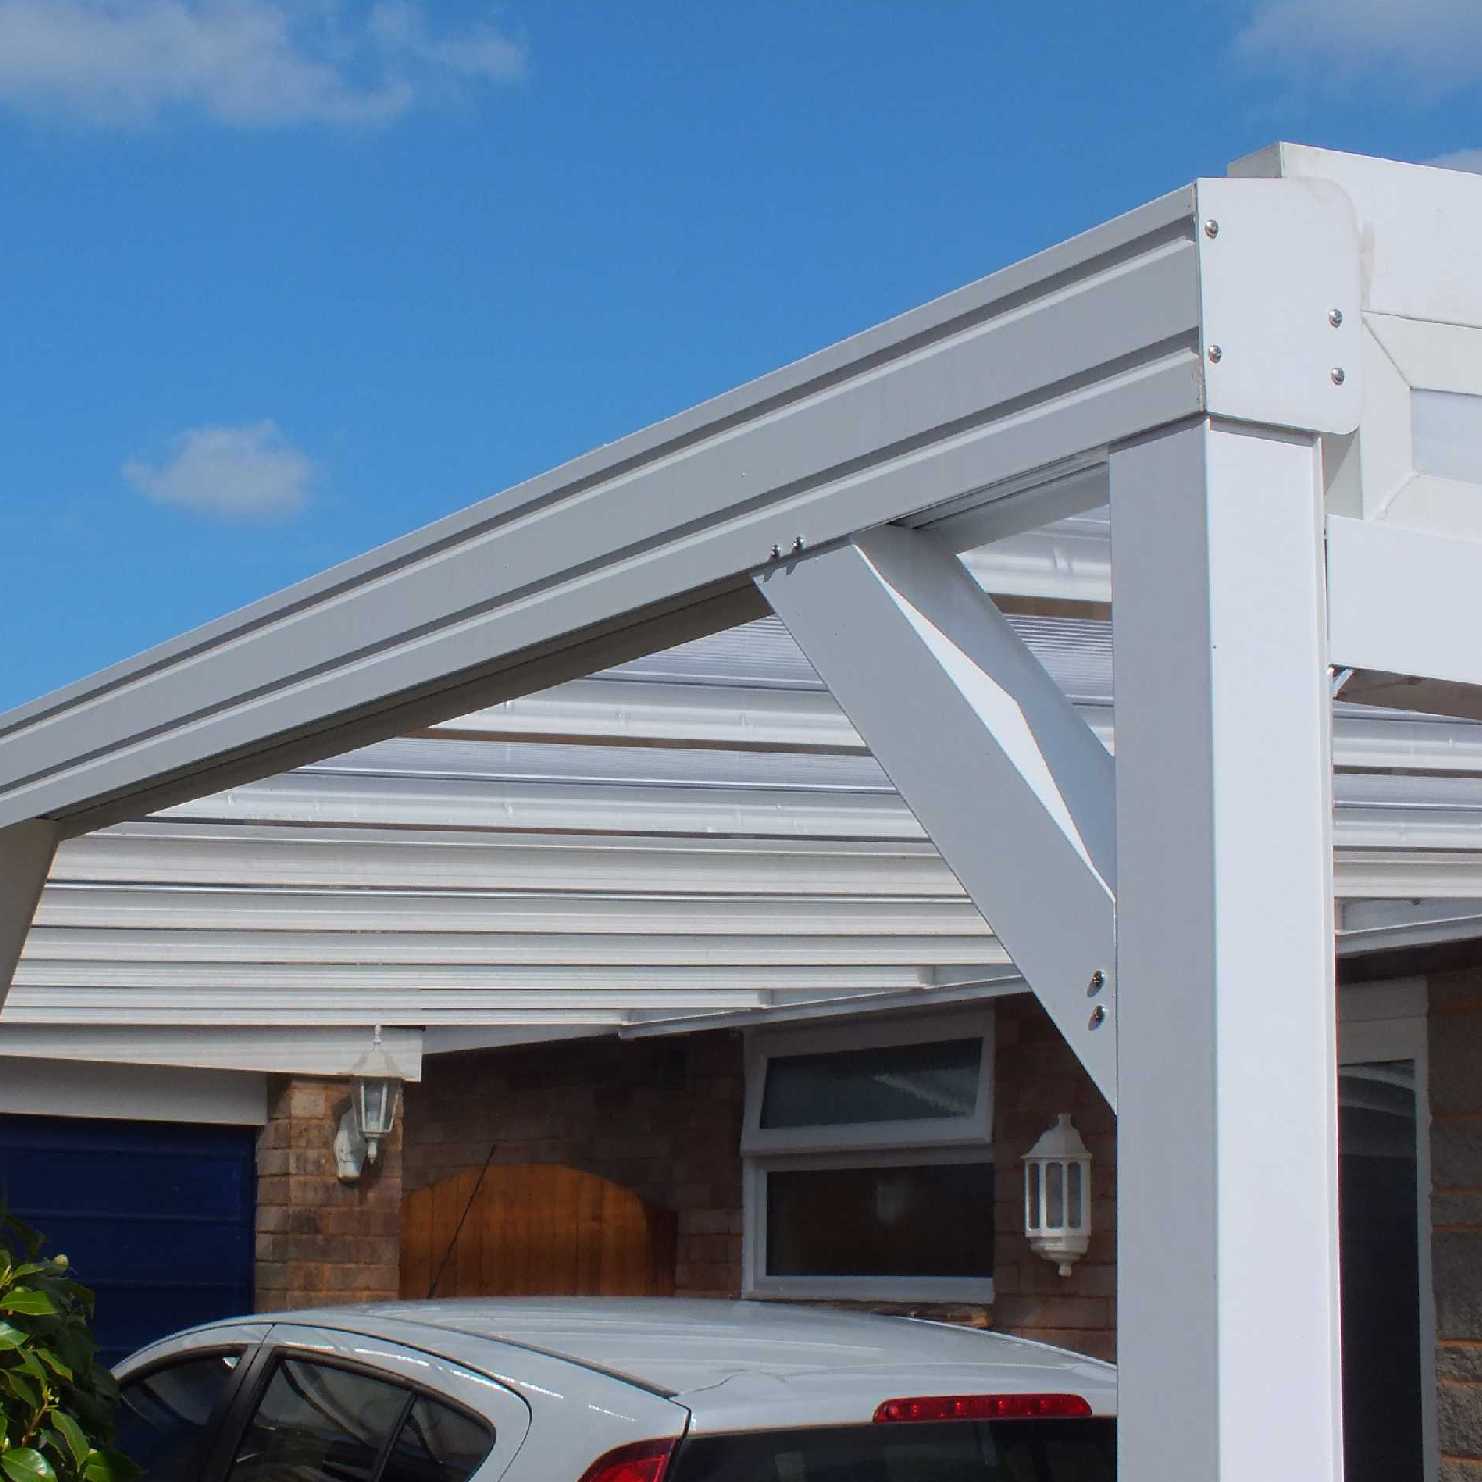 Buy Omega Smart Lean-To Canopy, White with 16mm Polycarbonate Glazing - 9.2m (W) x 4.0m (P), (5) Supporting Posts online today